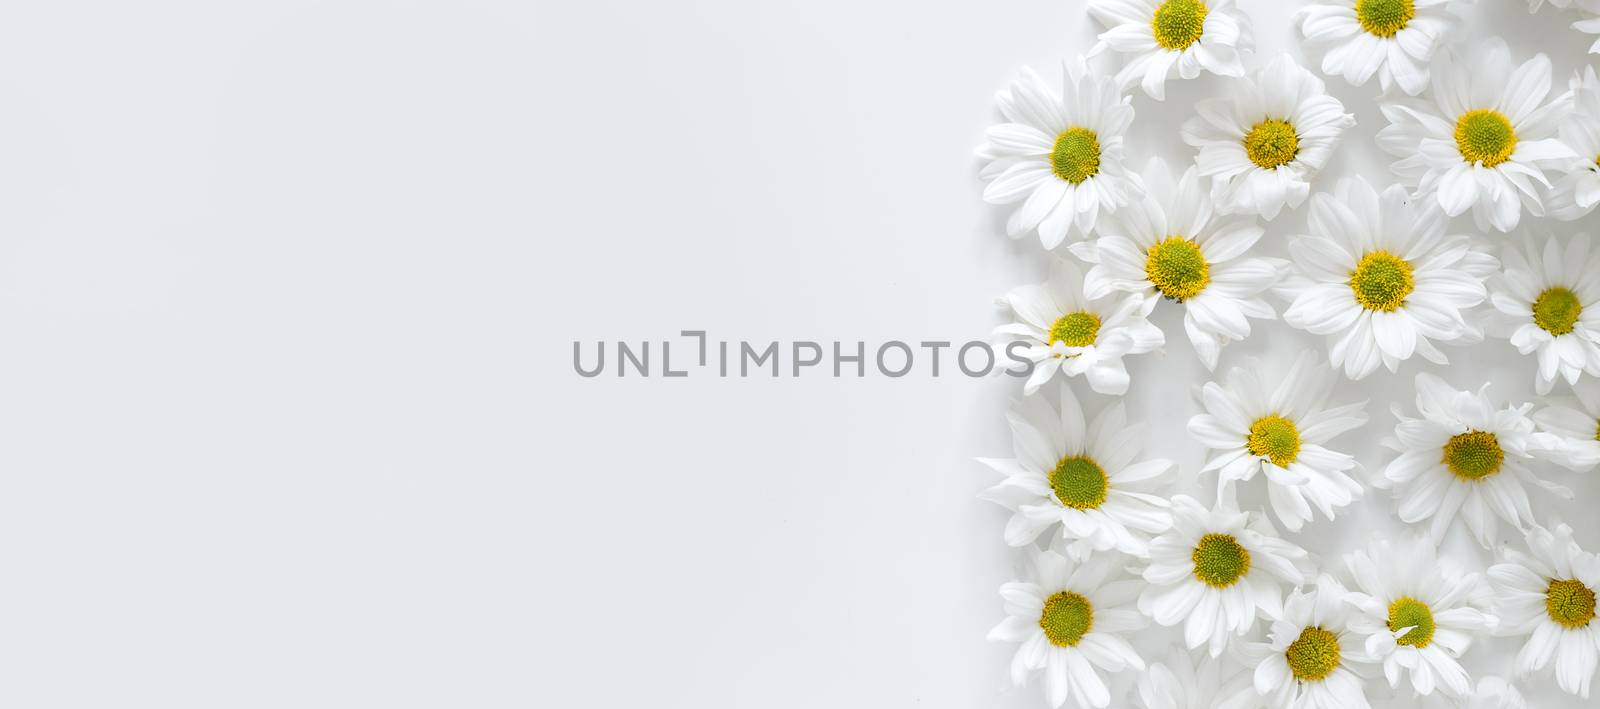 Floral background. Flat lay spring and summer daisy flowers with copy space. Flat lay